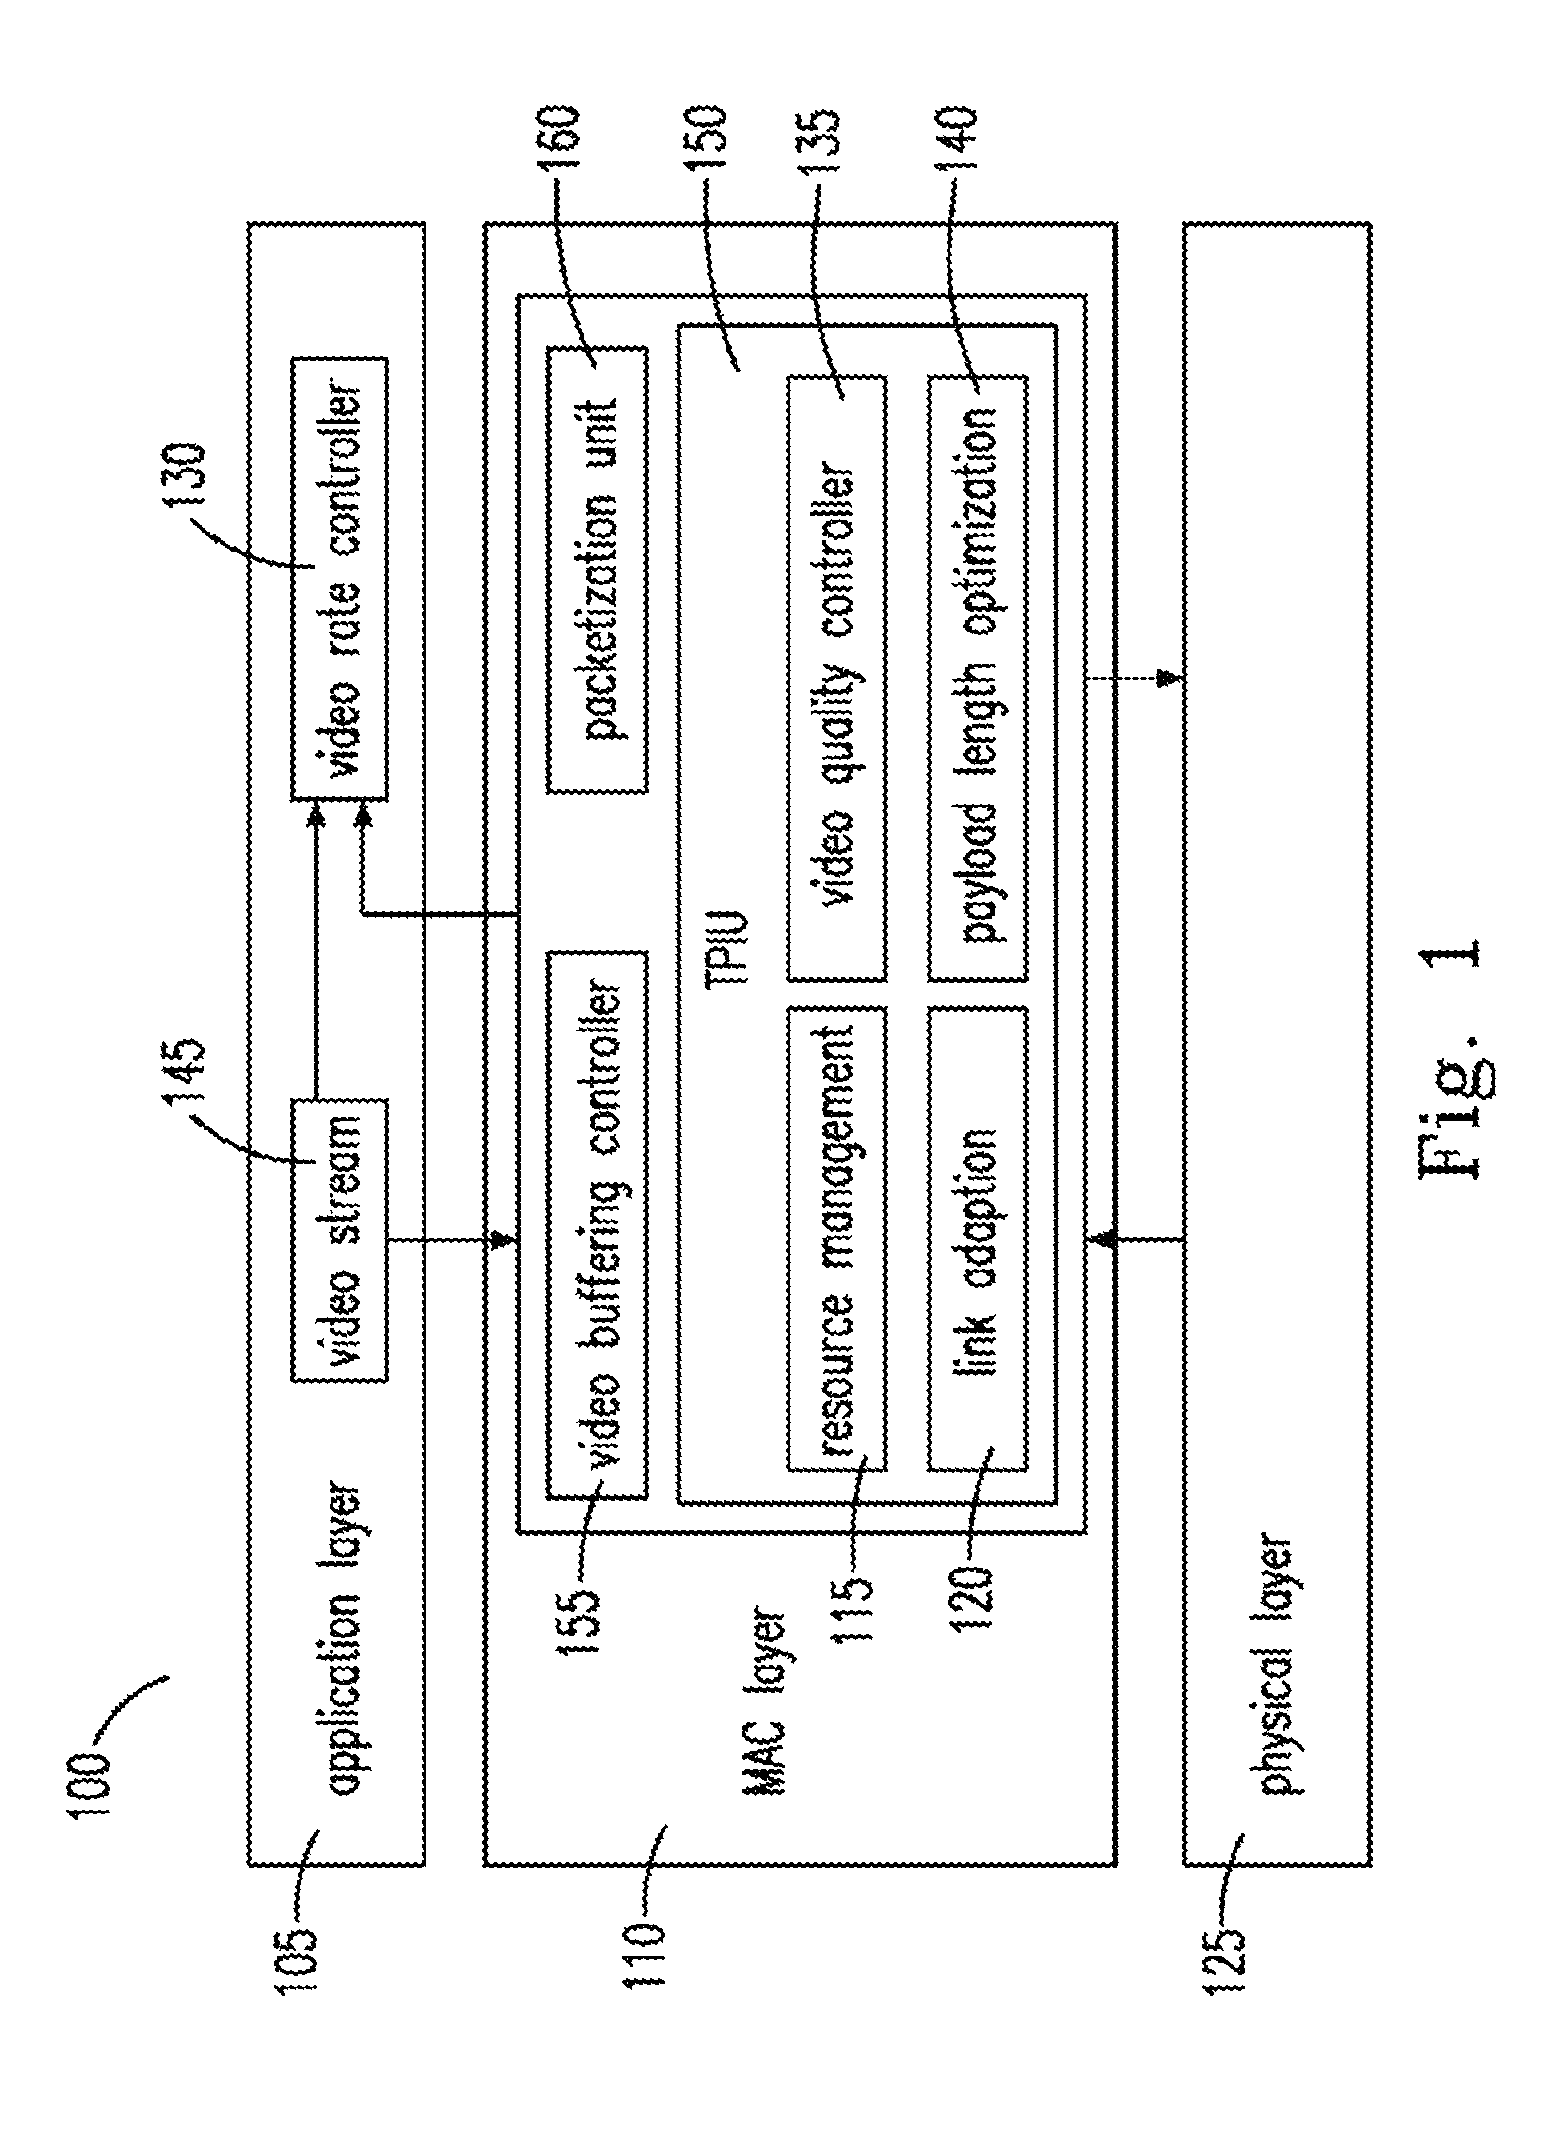 Transmission of video in wireless environment